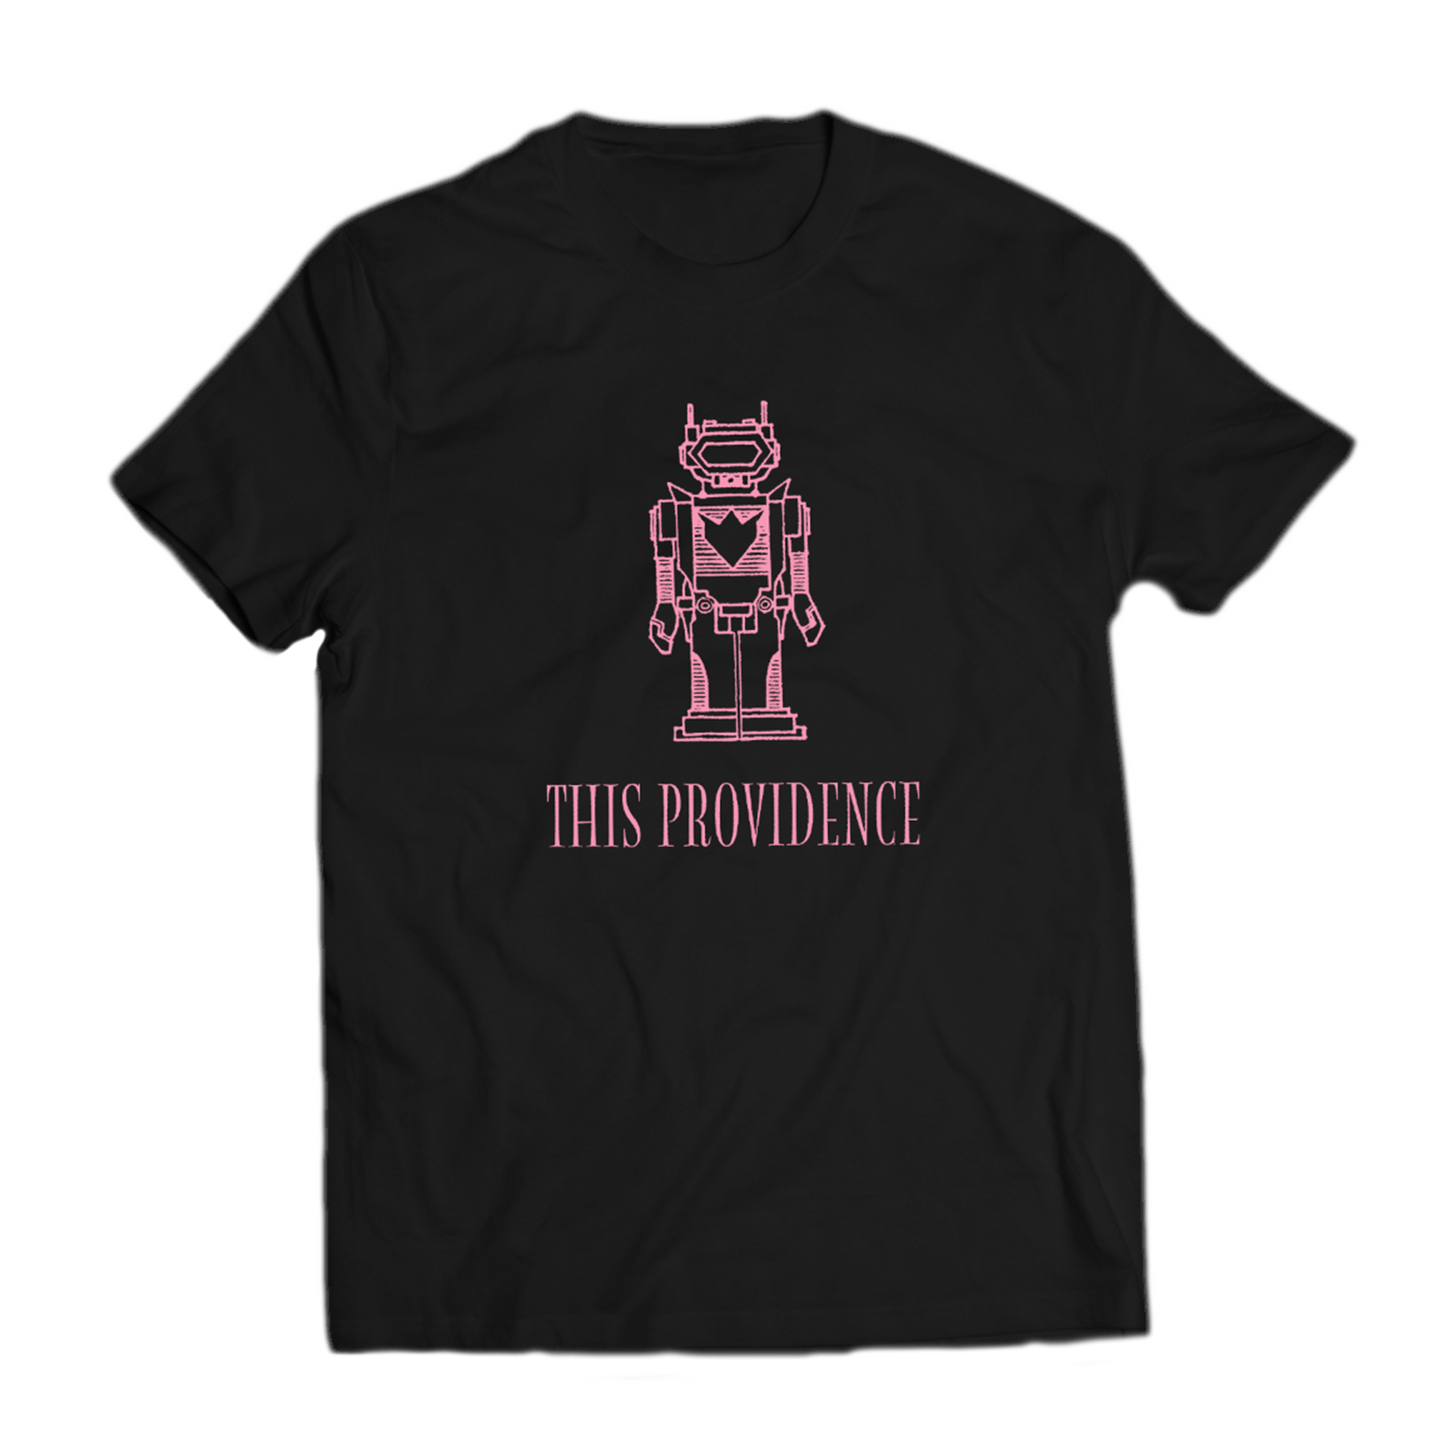 This Providence - "Robot" T-Shirt